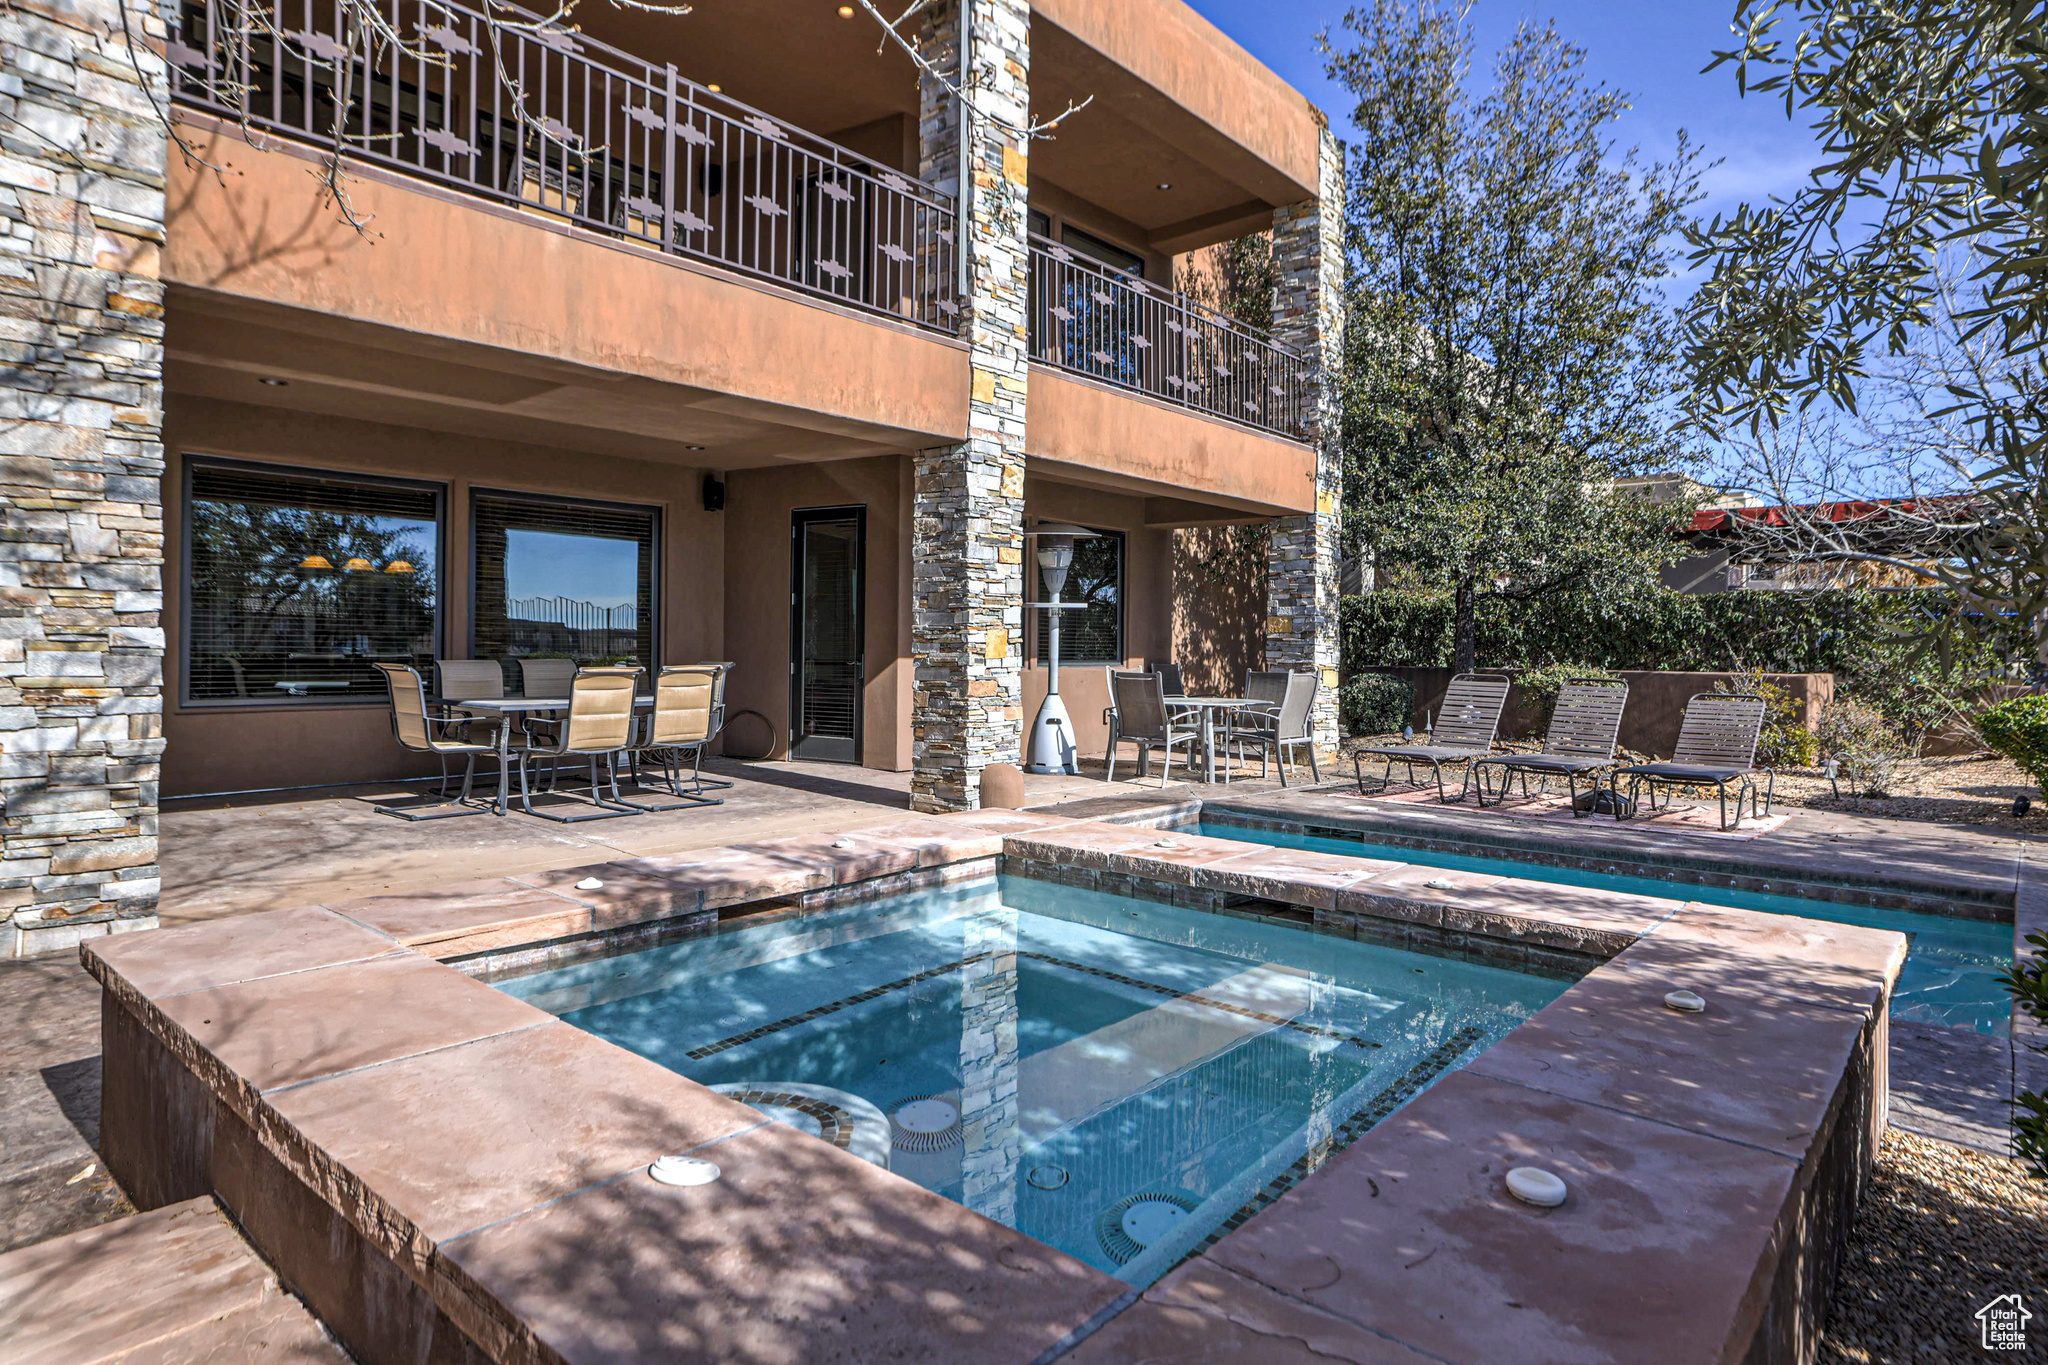 View of pool featuring an in ground hot tub and a patio area